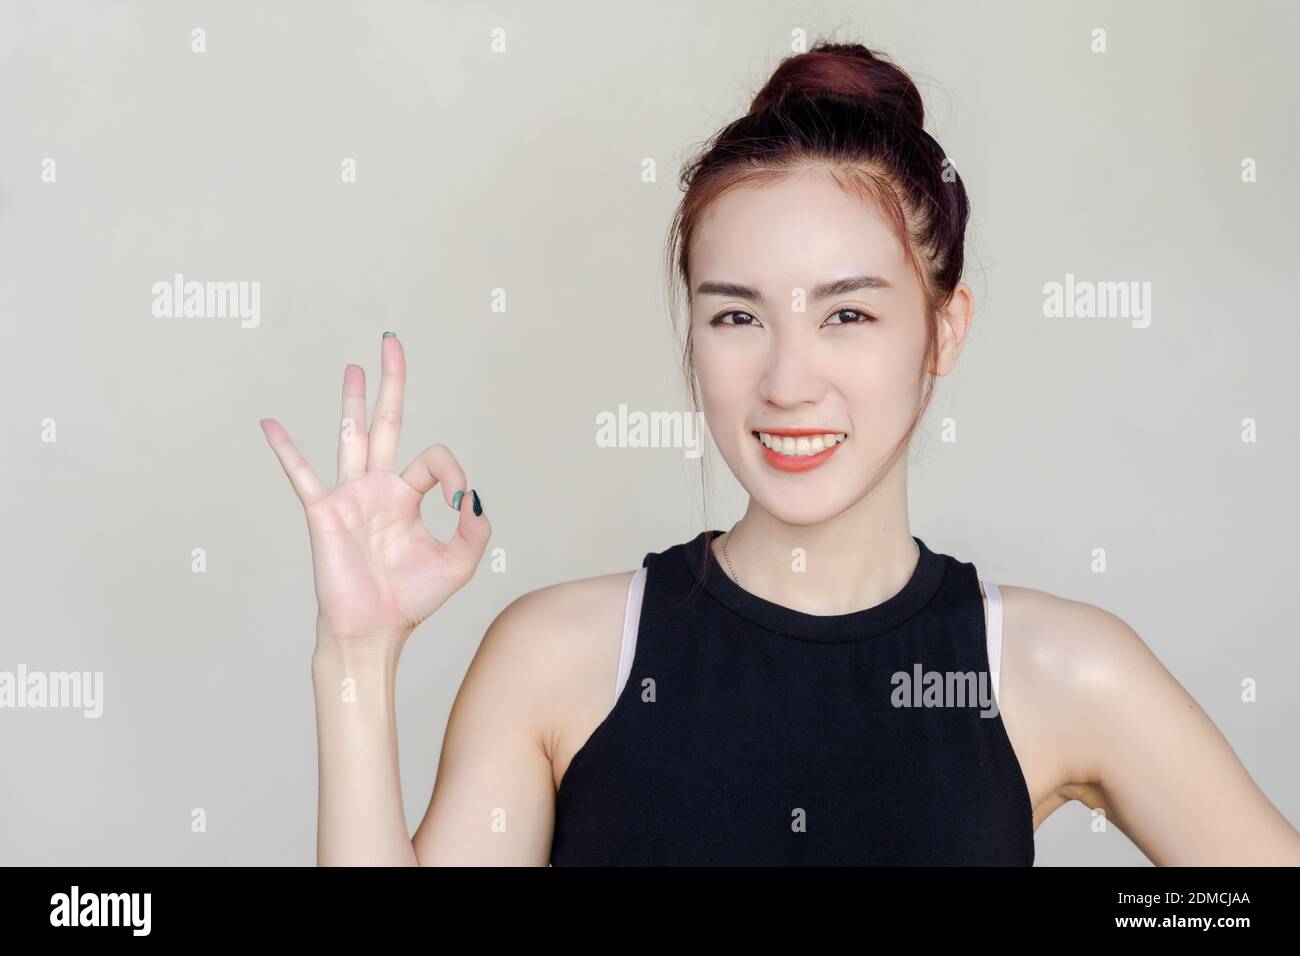 Portrait Of Smiling Young Woman Showing Ok Sign Against White Background Stock Photo